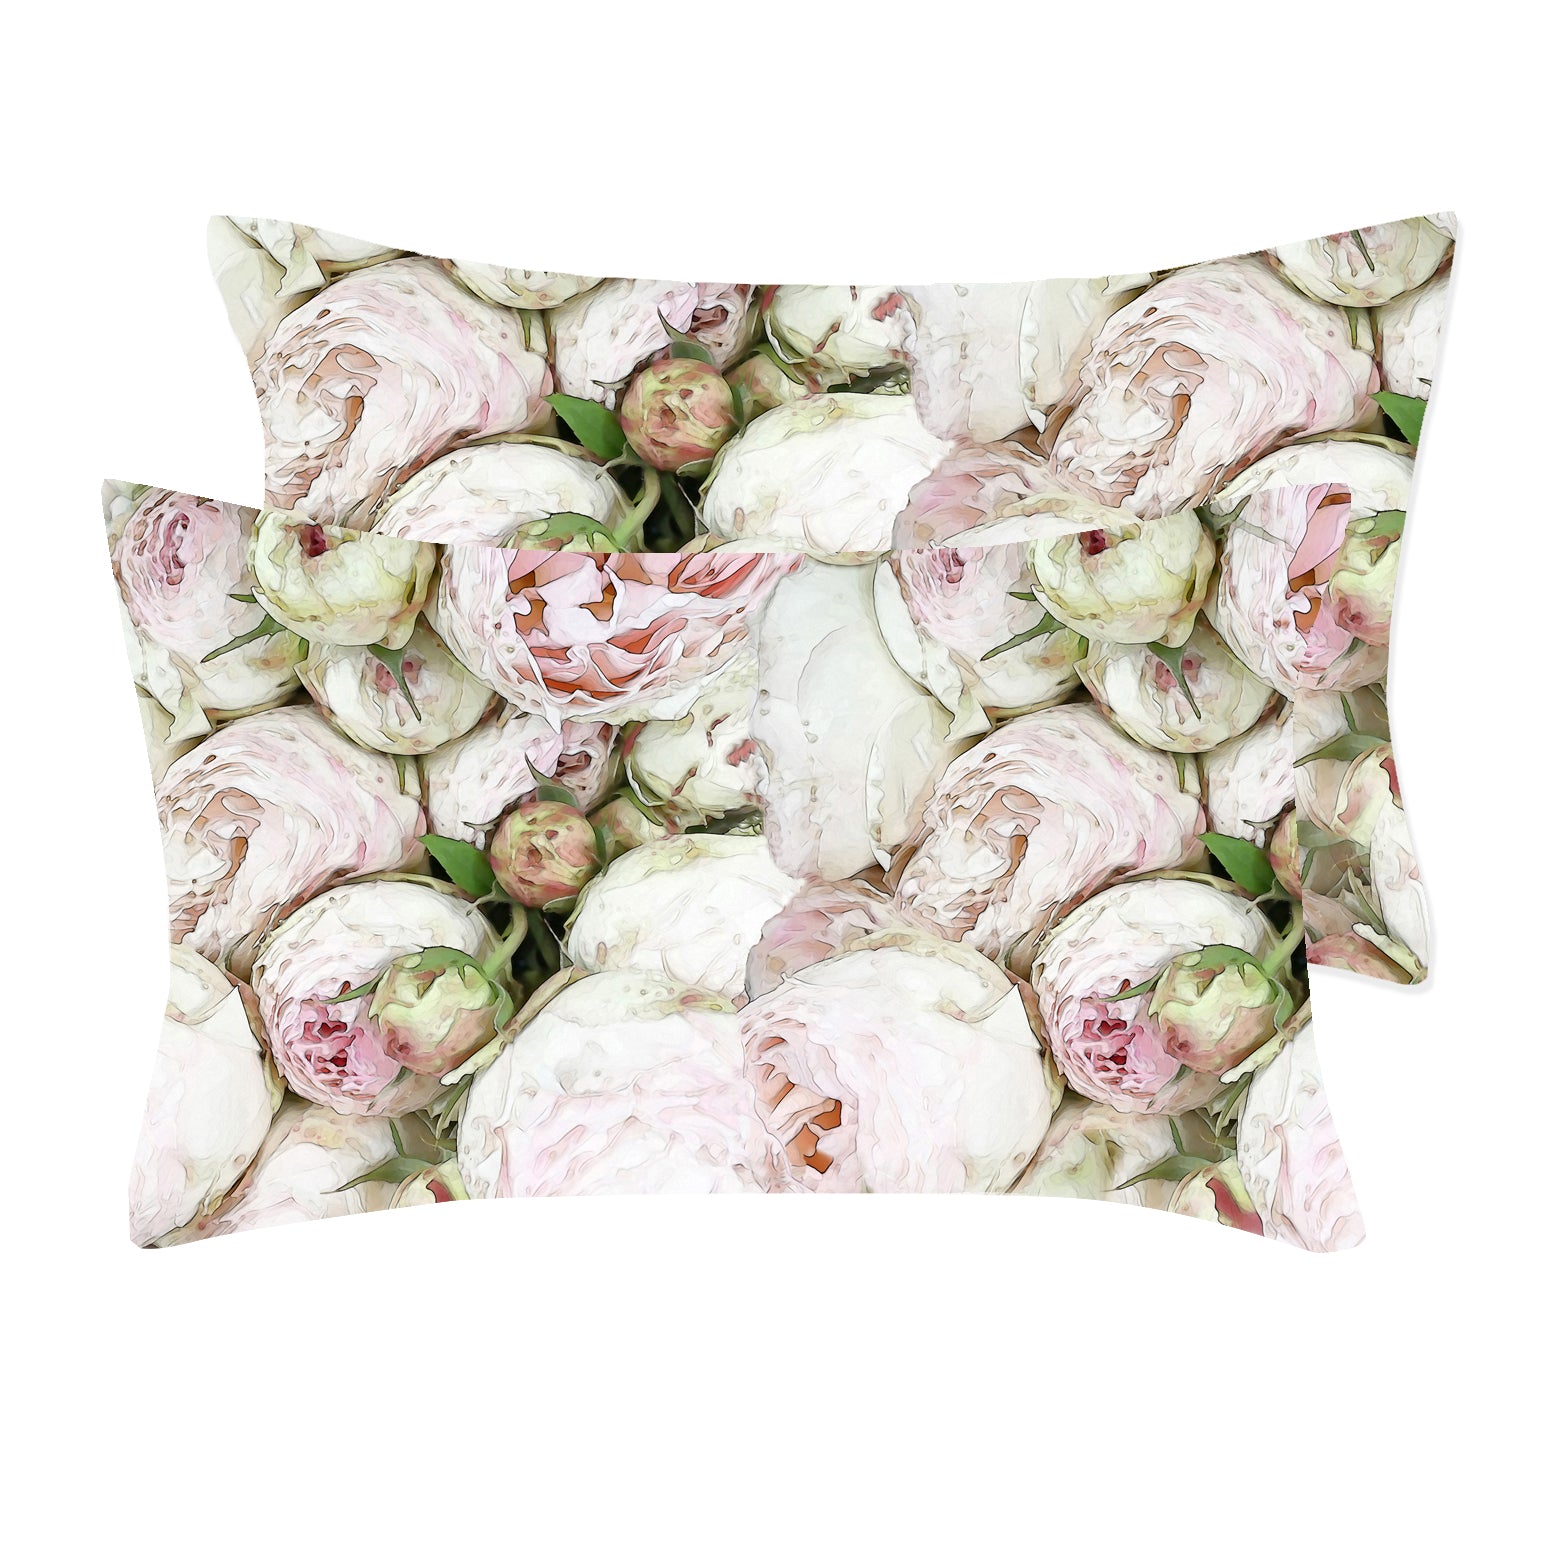 Satin Pillowcases in Peony Pink